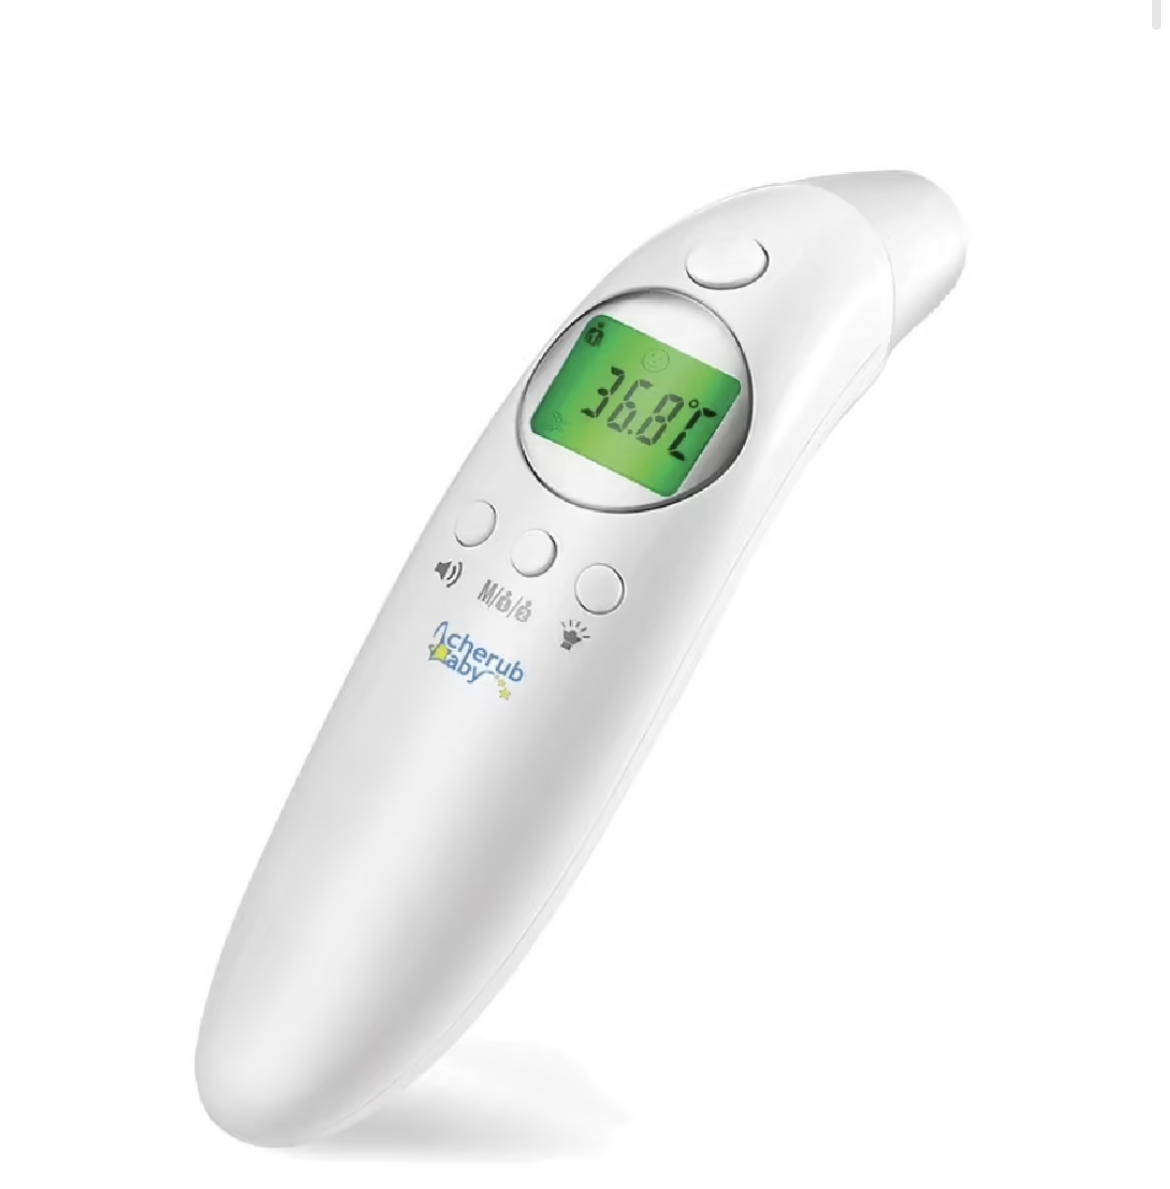 Digital baby thermometer